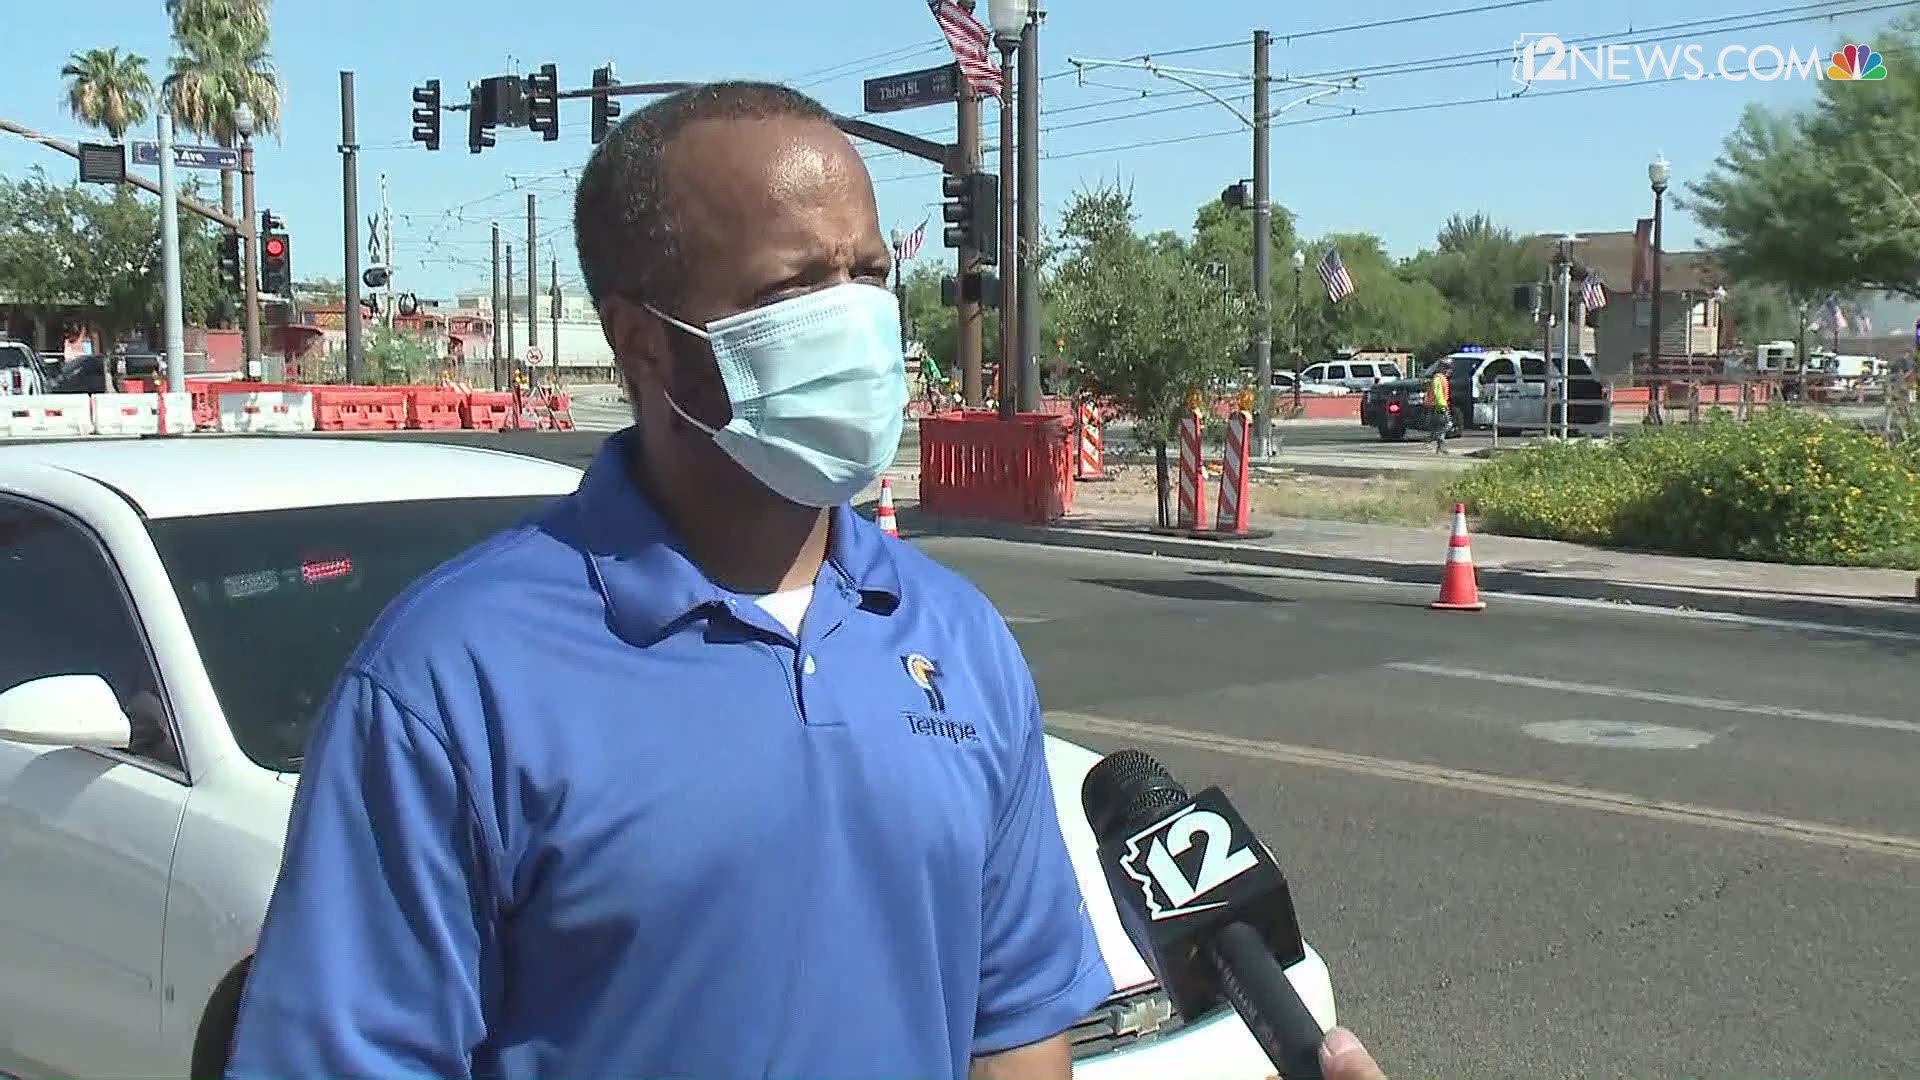 Tempe Mayor Corey Woods gives an update on the train derailment and bridge fire that occurred on July 29. We're continuing to monitor the incident.